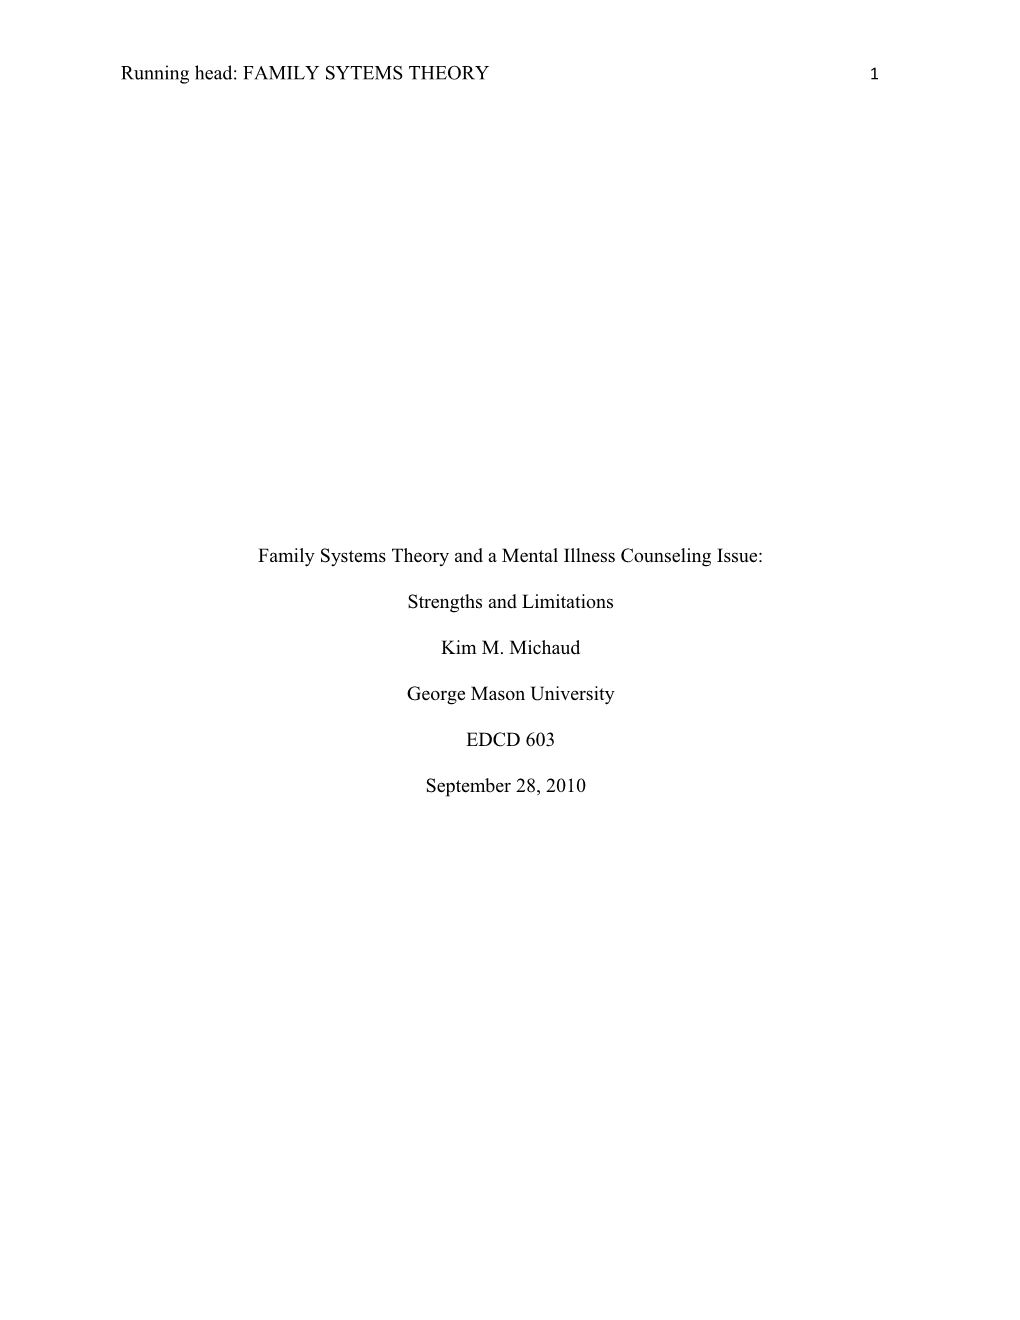 Family Systems Theory and a Mental Illness Counseling Issue